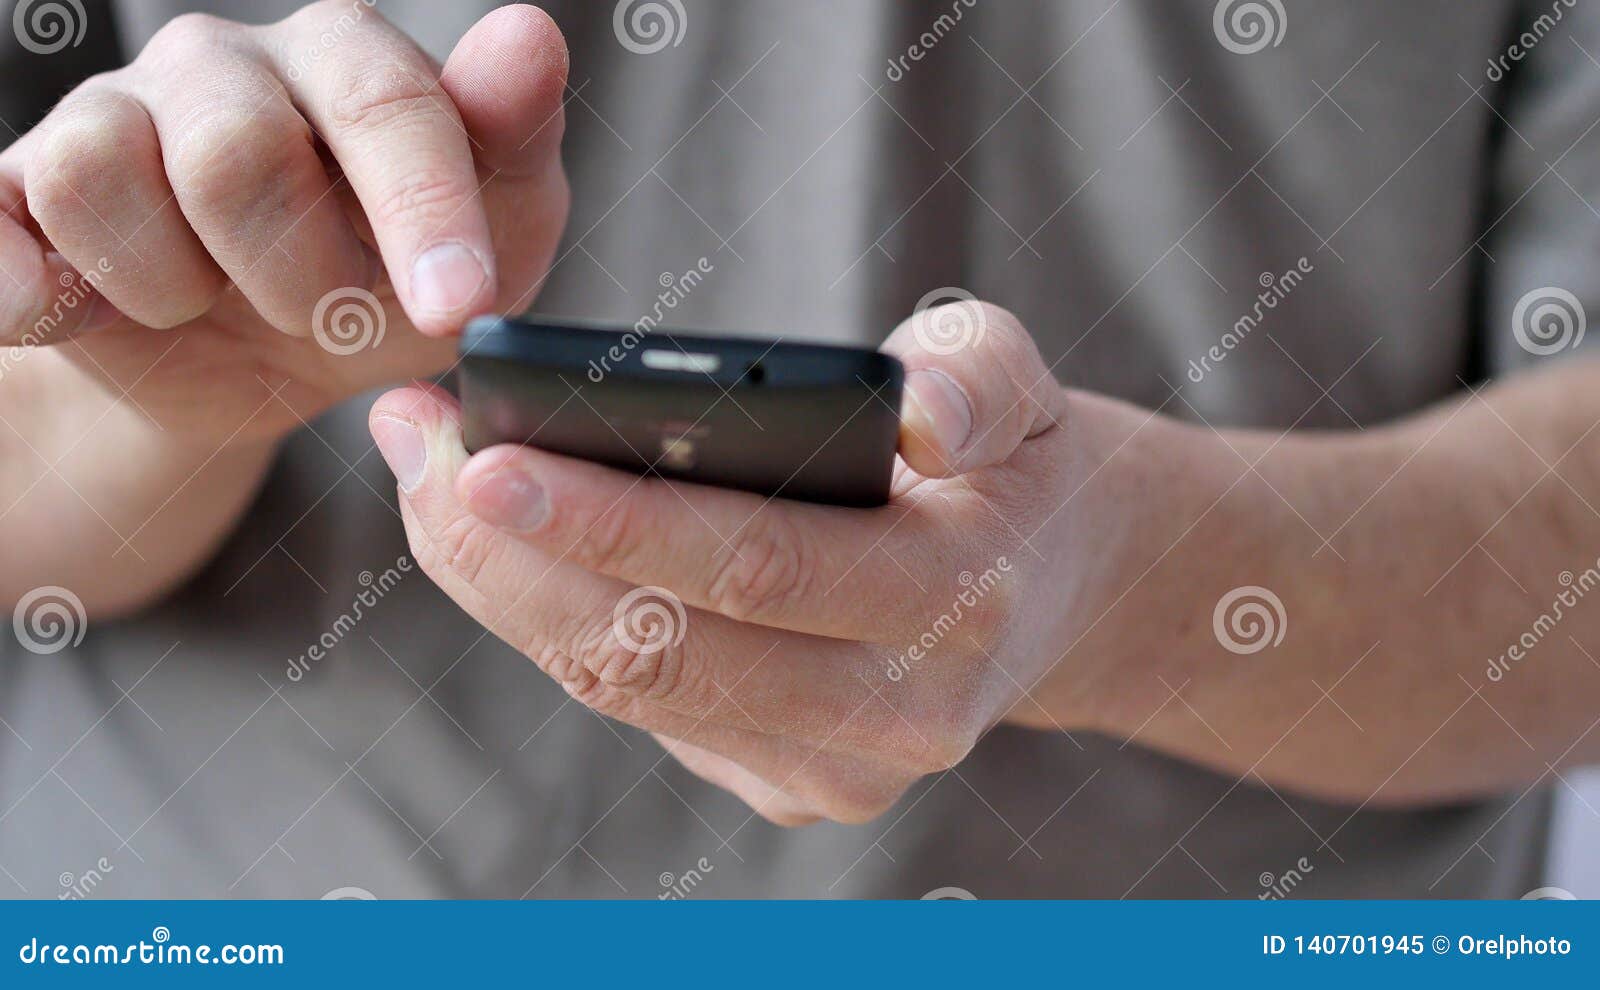 A Man Using Apps on a Mobile Touchscreen Smartphone Stock Image - Image ...